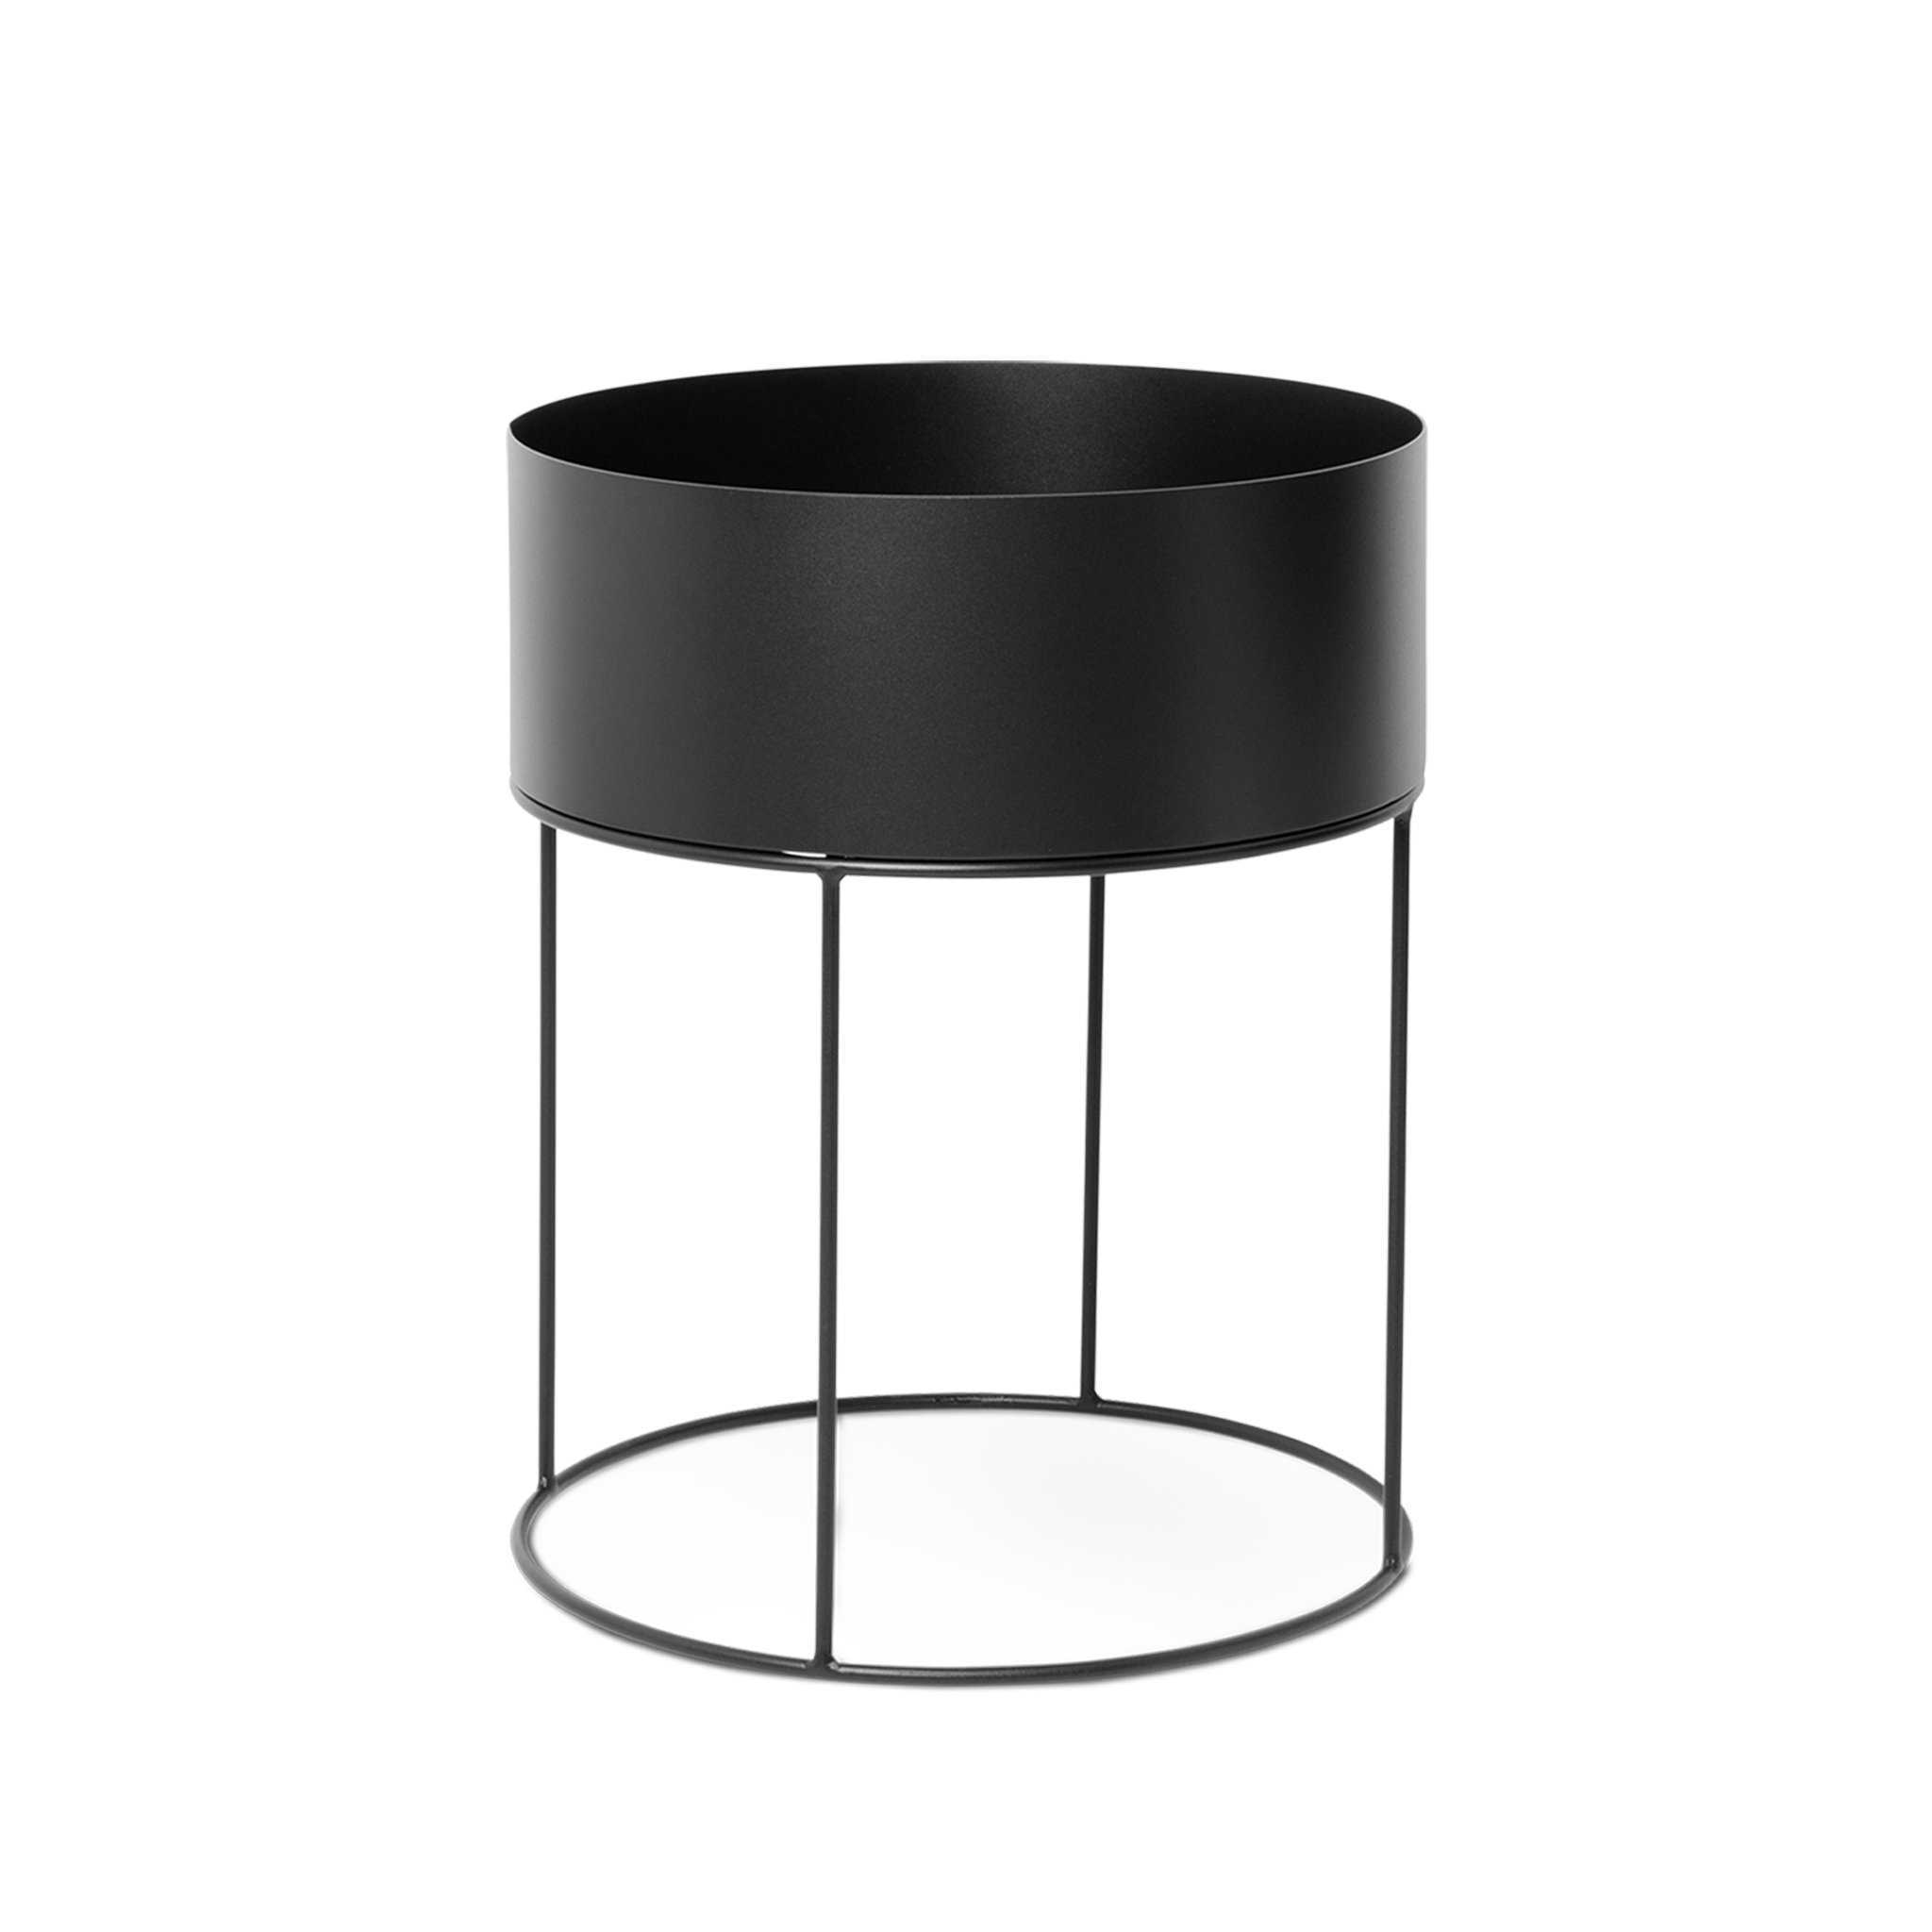 Clearance Plant Box - Round / Black by Ferm Living